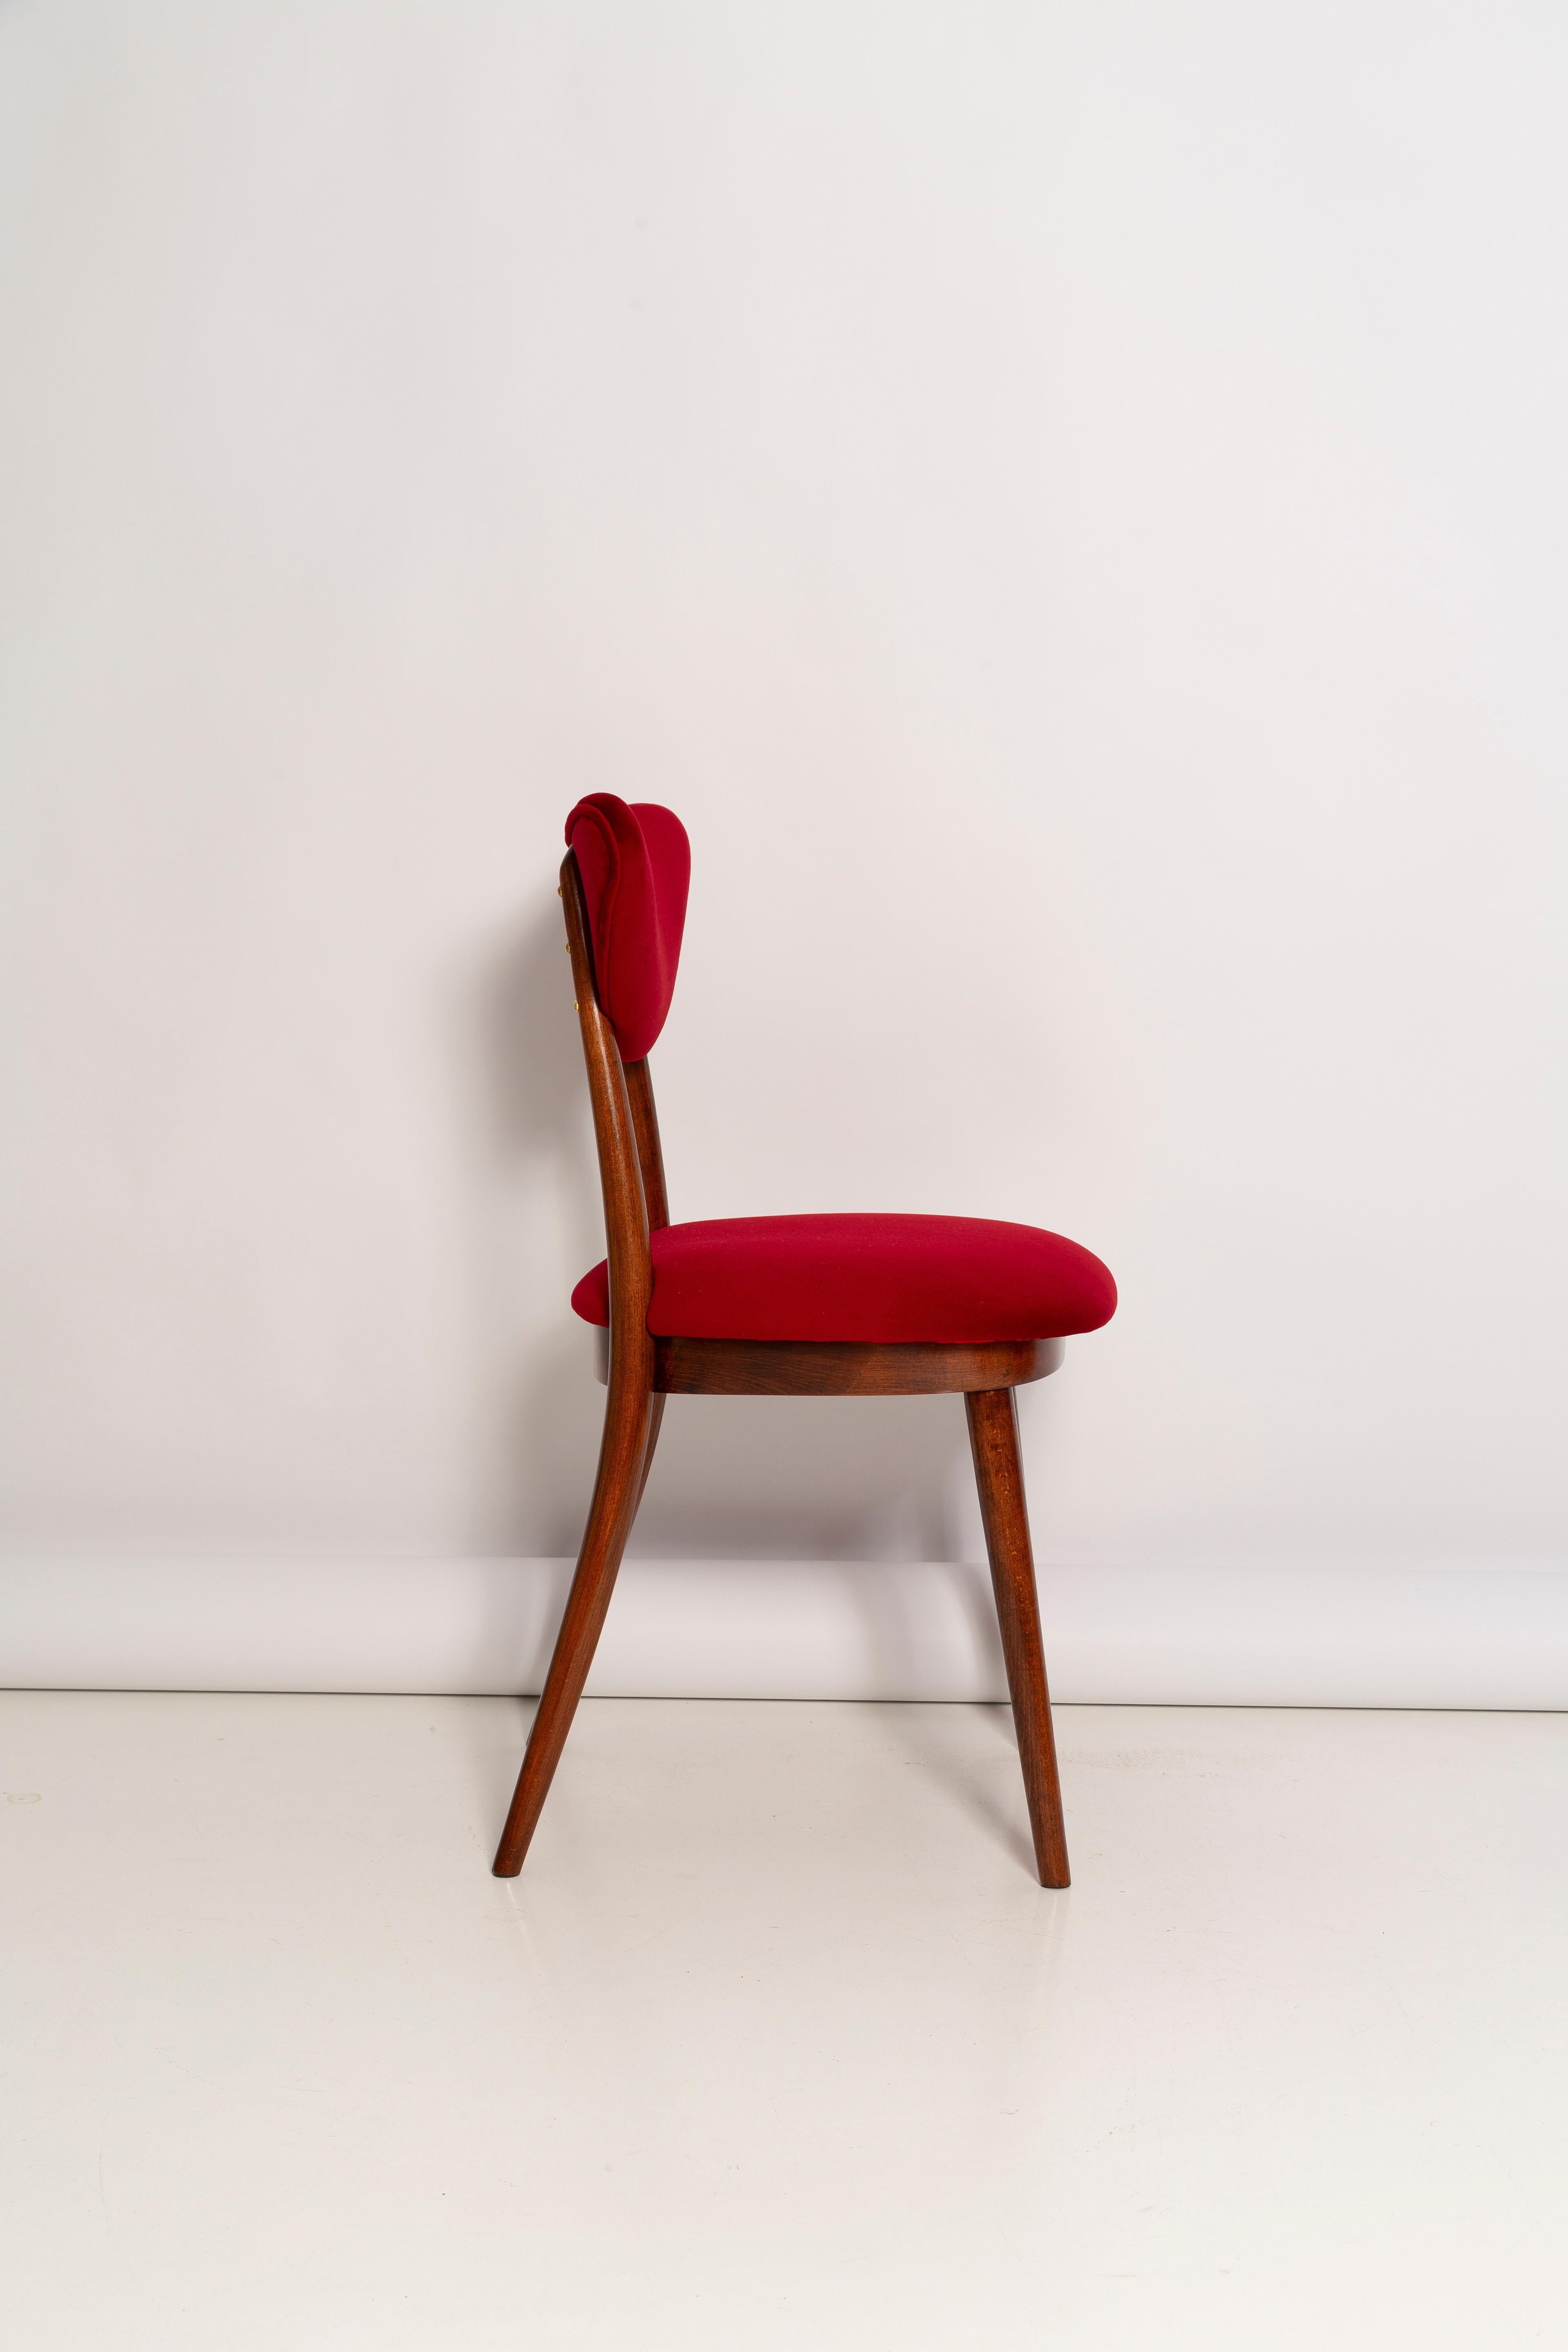 Set of Twelve Mid Century Red Heart Chairs, Poland, 1960s For Sale 1